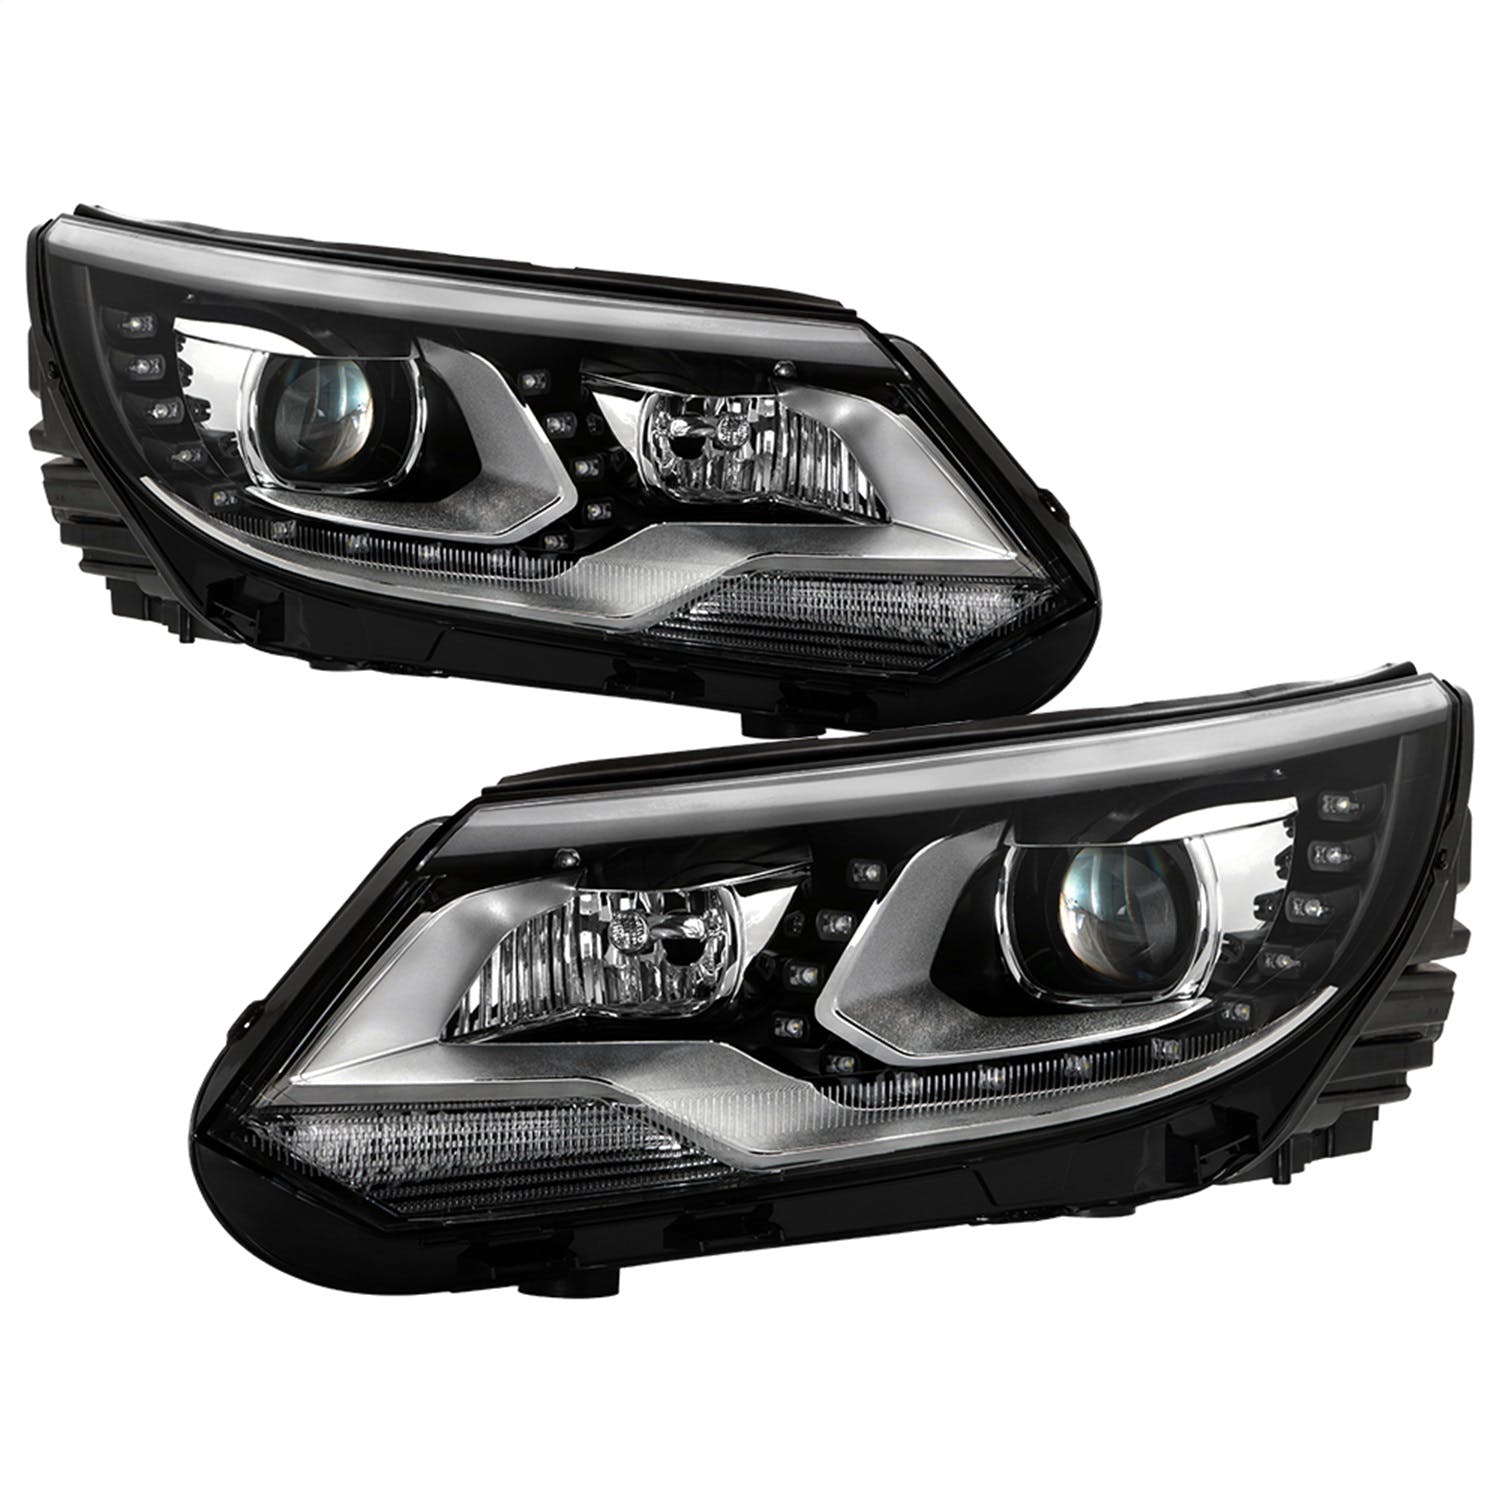 XTUNE POWER 9948527 VW Tiguan 12 17 (Fit OE Halogen Model) LED DRL Projector Headlights Low Beam H7(Included) ; High Beam H7(Included) ; Signal 1156A(Included) Chrome